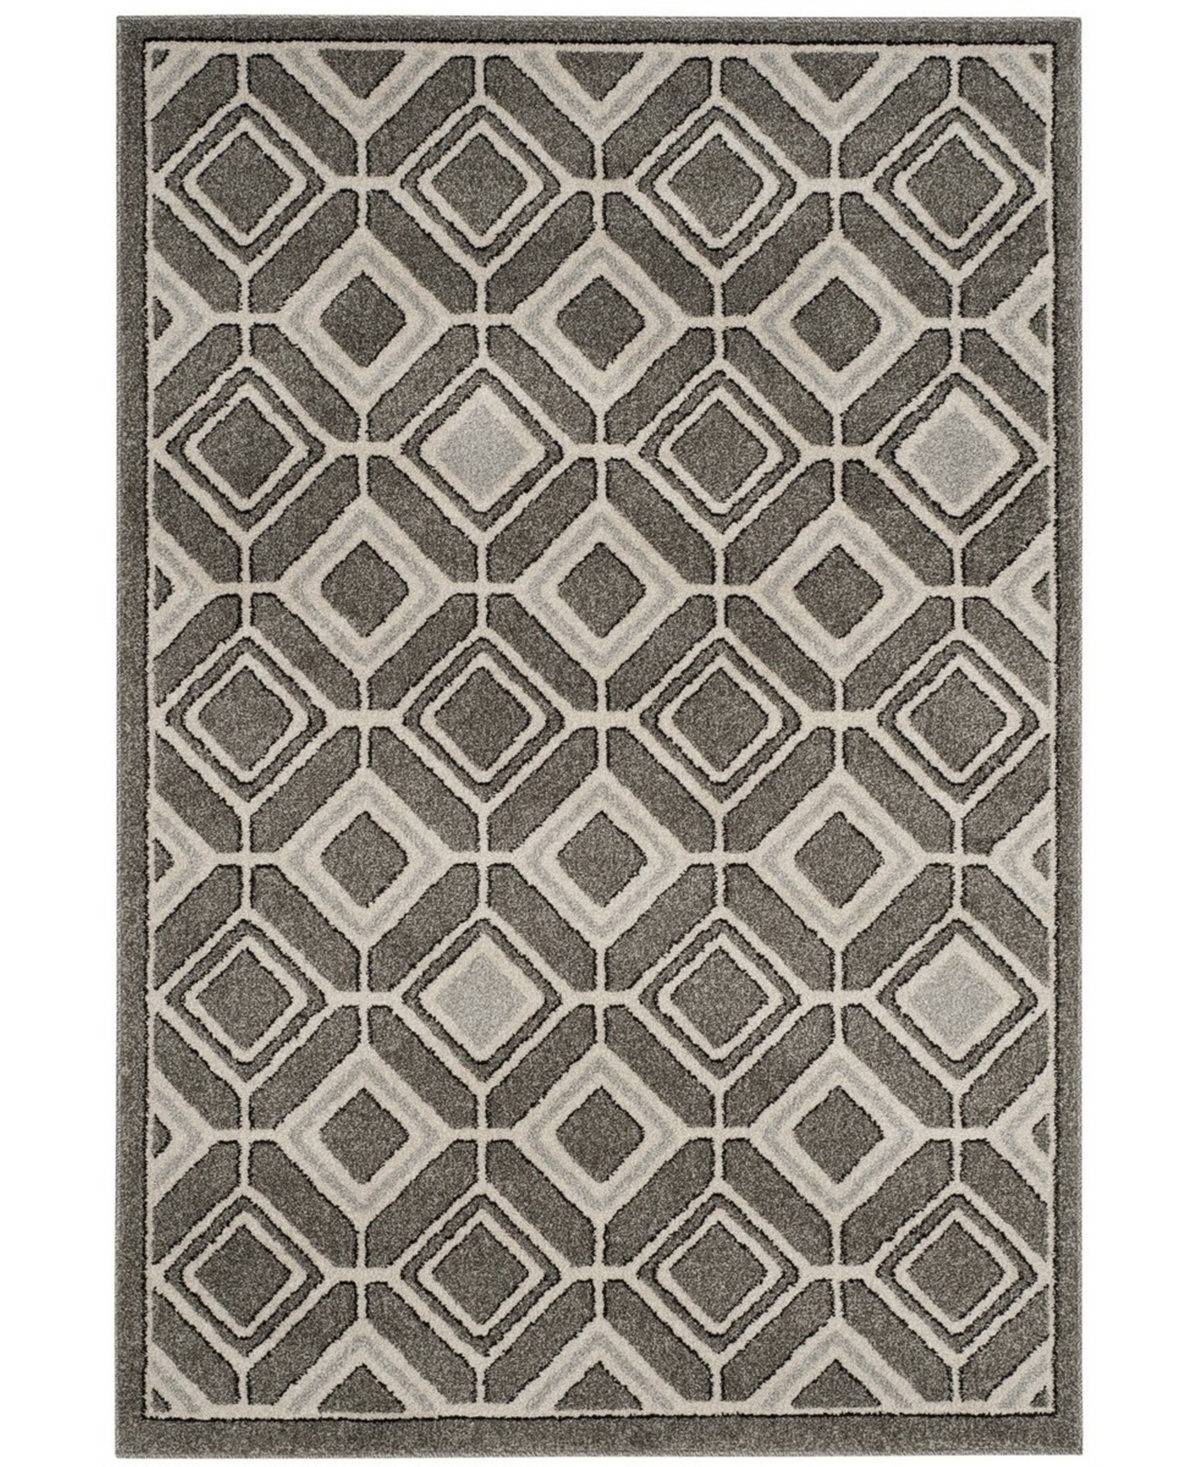 Safavieh Amherst Amt433 Gray And Light Gray 6' X 9' Area Rug